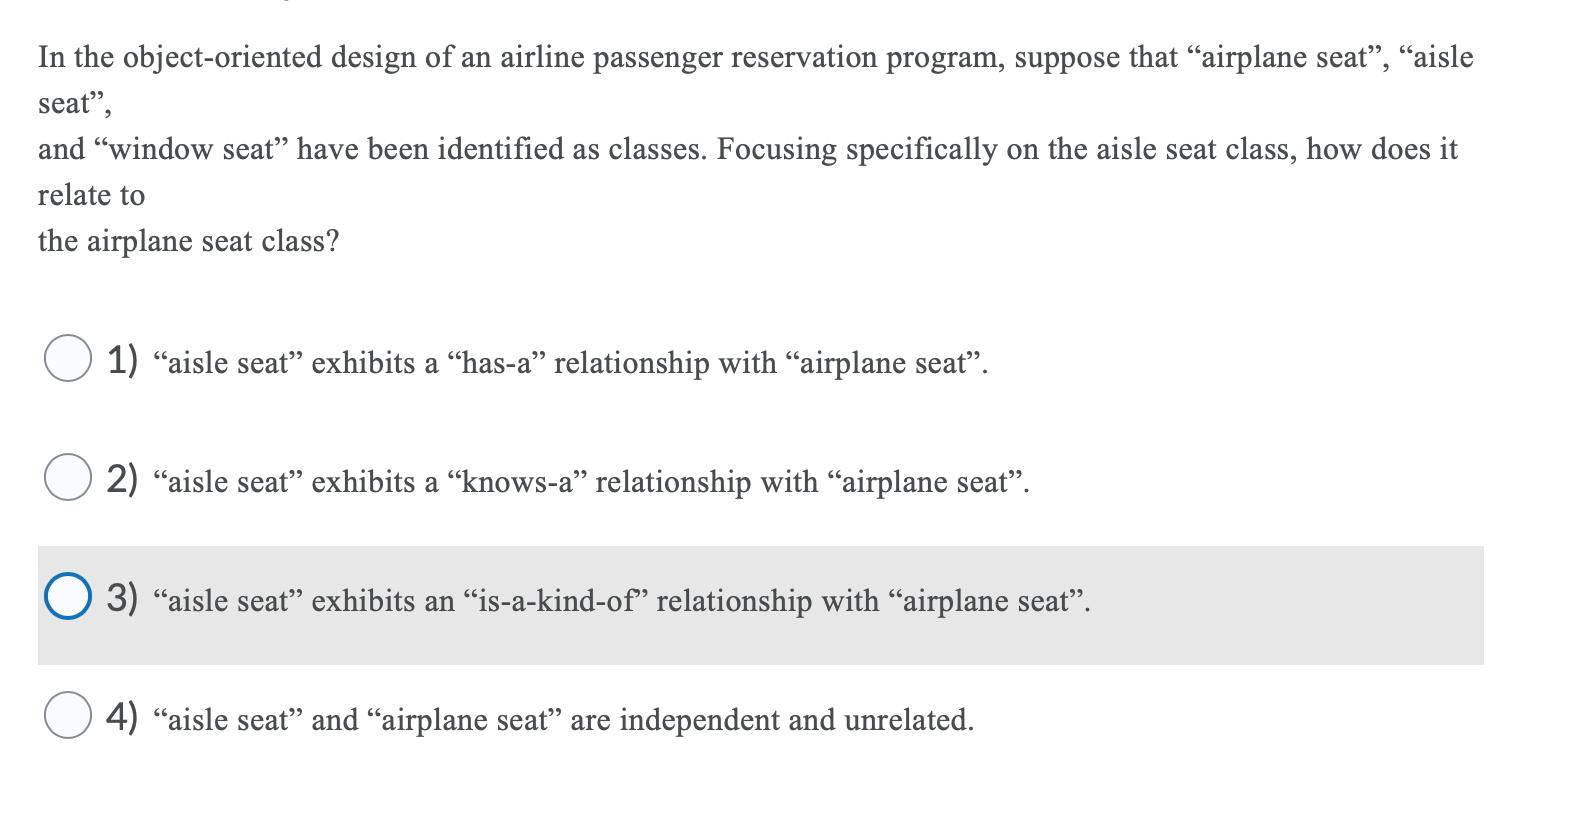 In the object-oriented design of an airline passenger reservation program, suppose that 